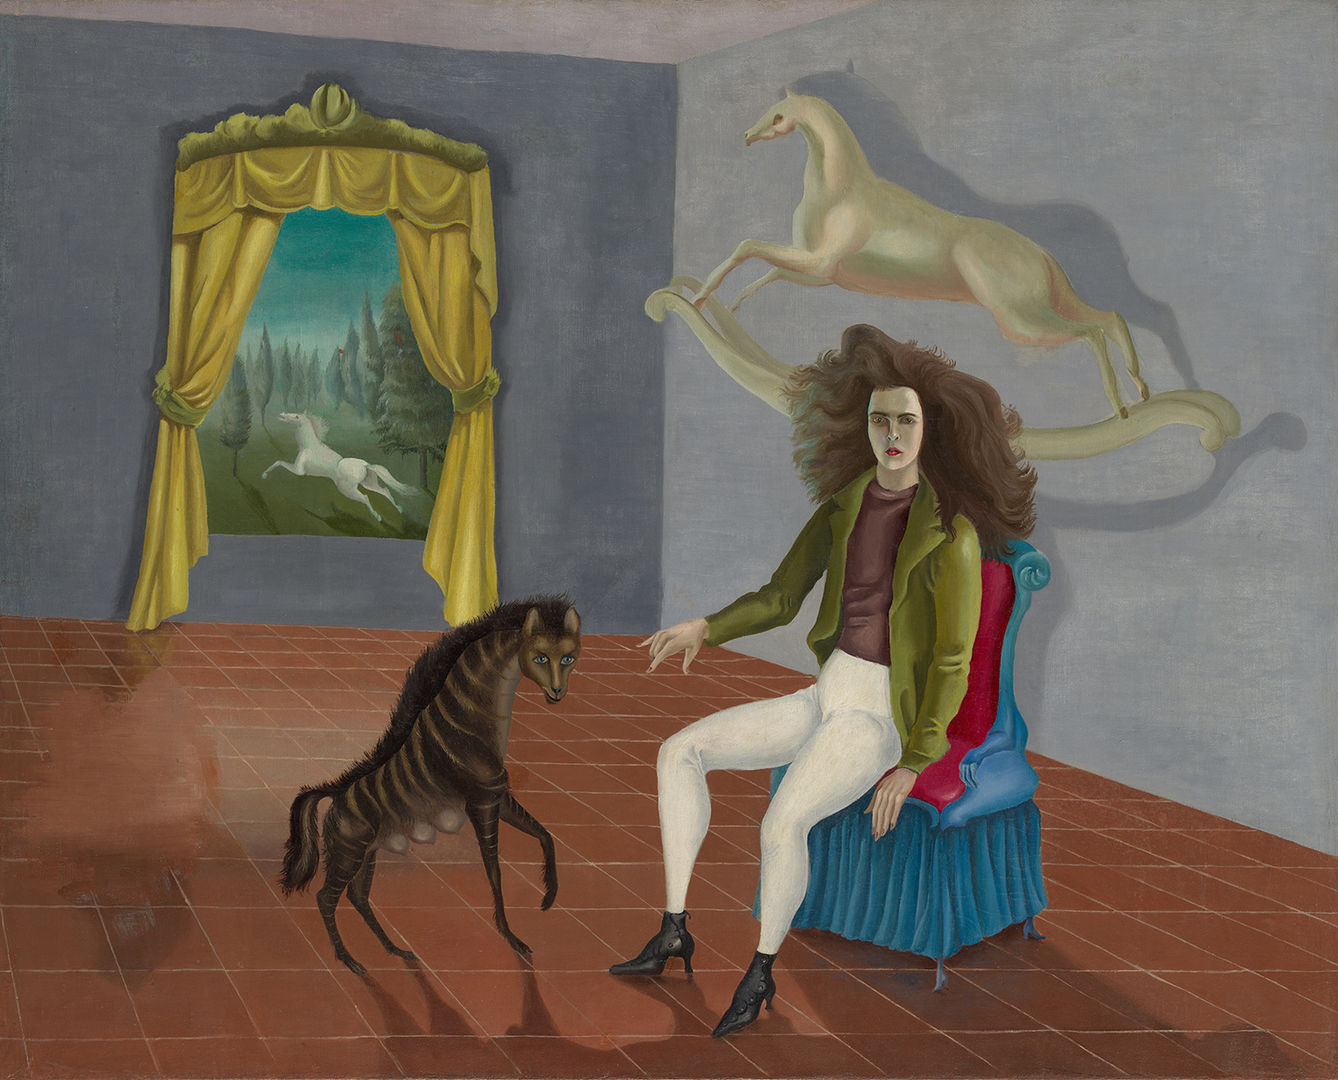 Self-portrait of Leonora Carrington’s sporting white jodhpurs and a wild mane of hair; she’s perched on the edge of a chair with her hand outstretched toward the prancing hyena and her back to two horses: a tailless white rocking horse flying behind her and a galloping white horse visible in a curtained window.